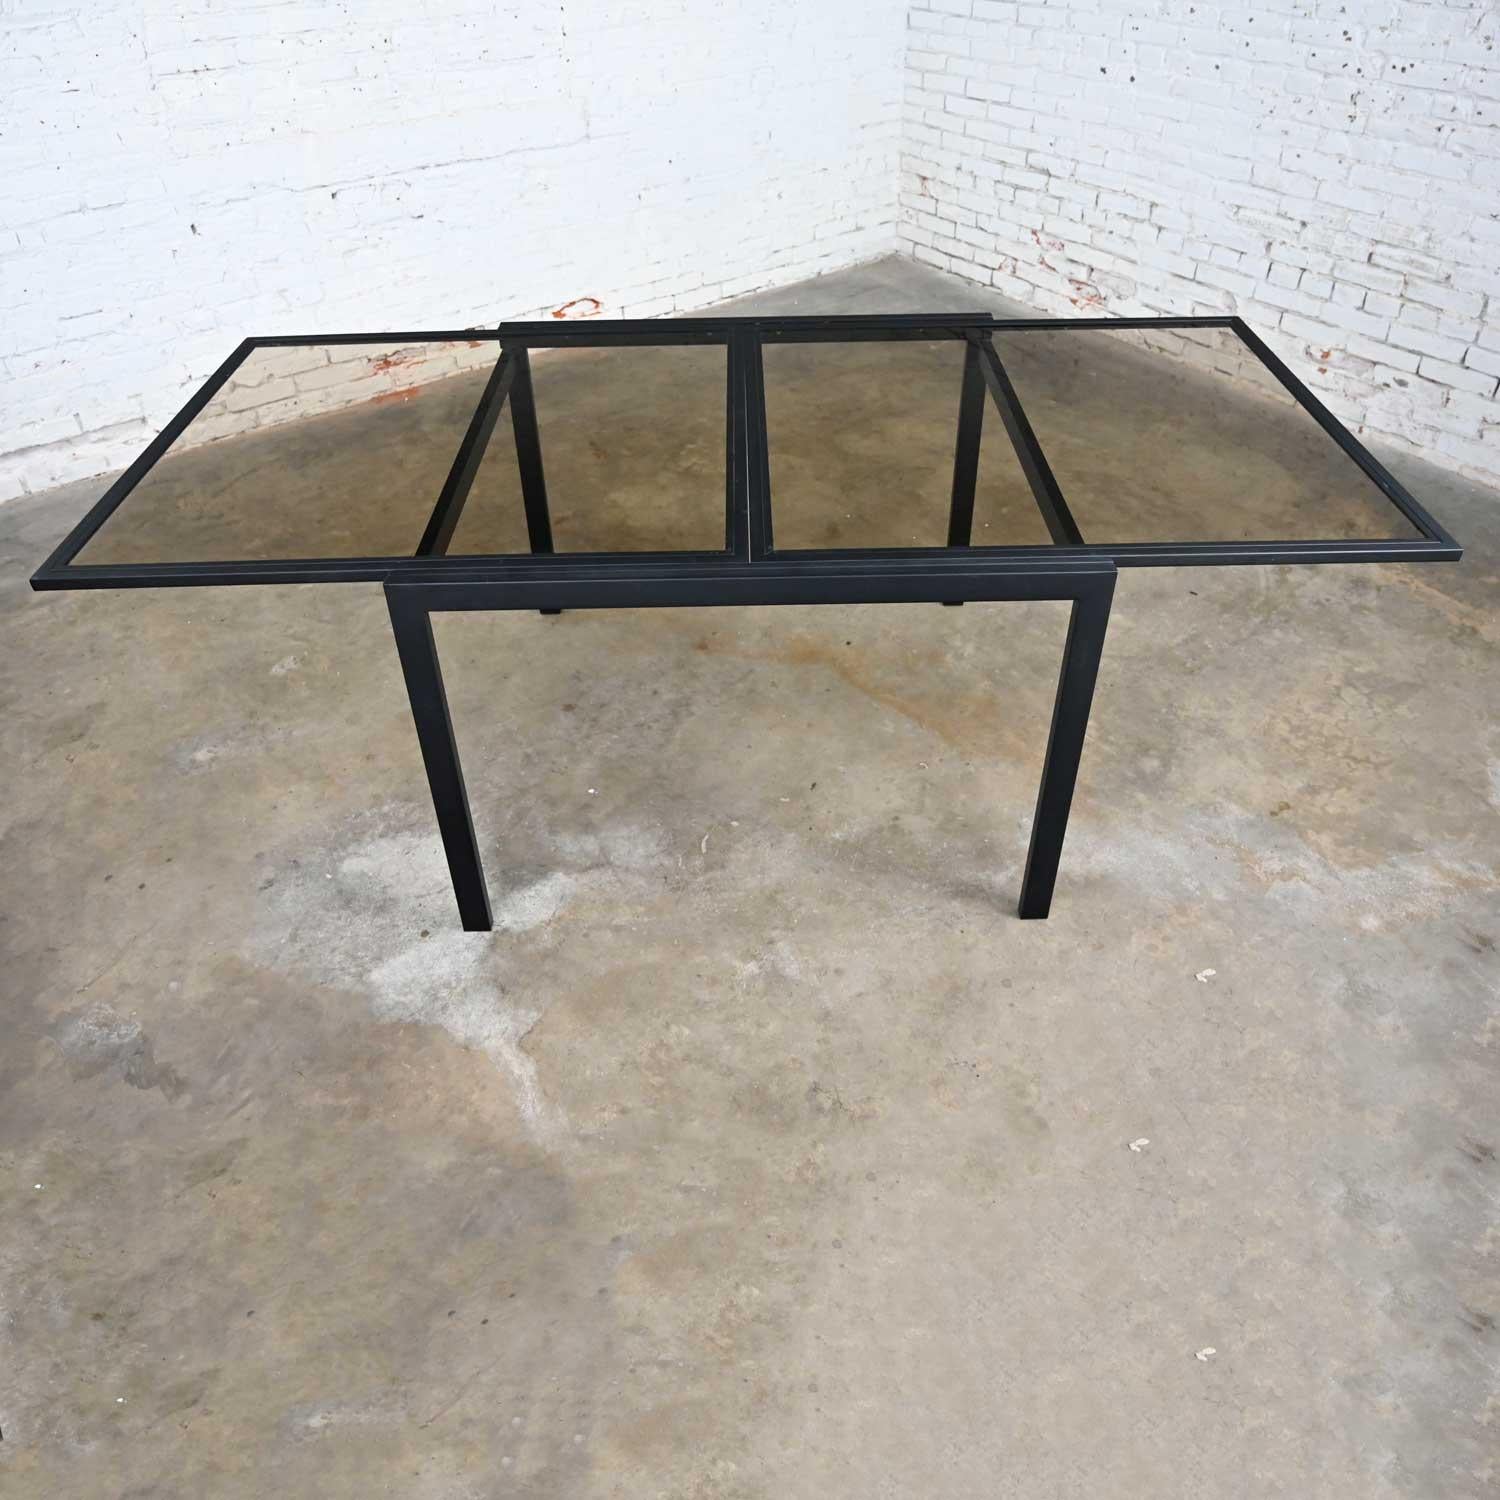 Fabulous MCM (a.k.a. Mid-Century Modern) to Modern black powder coated metal smoked glass square expanding table attributed to DIA (a.k.a. Design Institute of America.) Beautiful condition, keeping in mind that this is vintage and not new so will